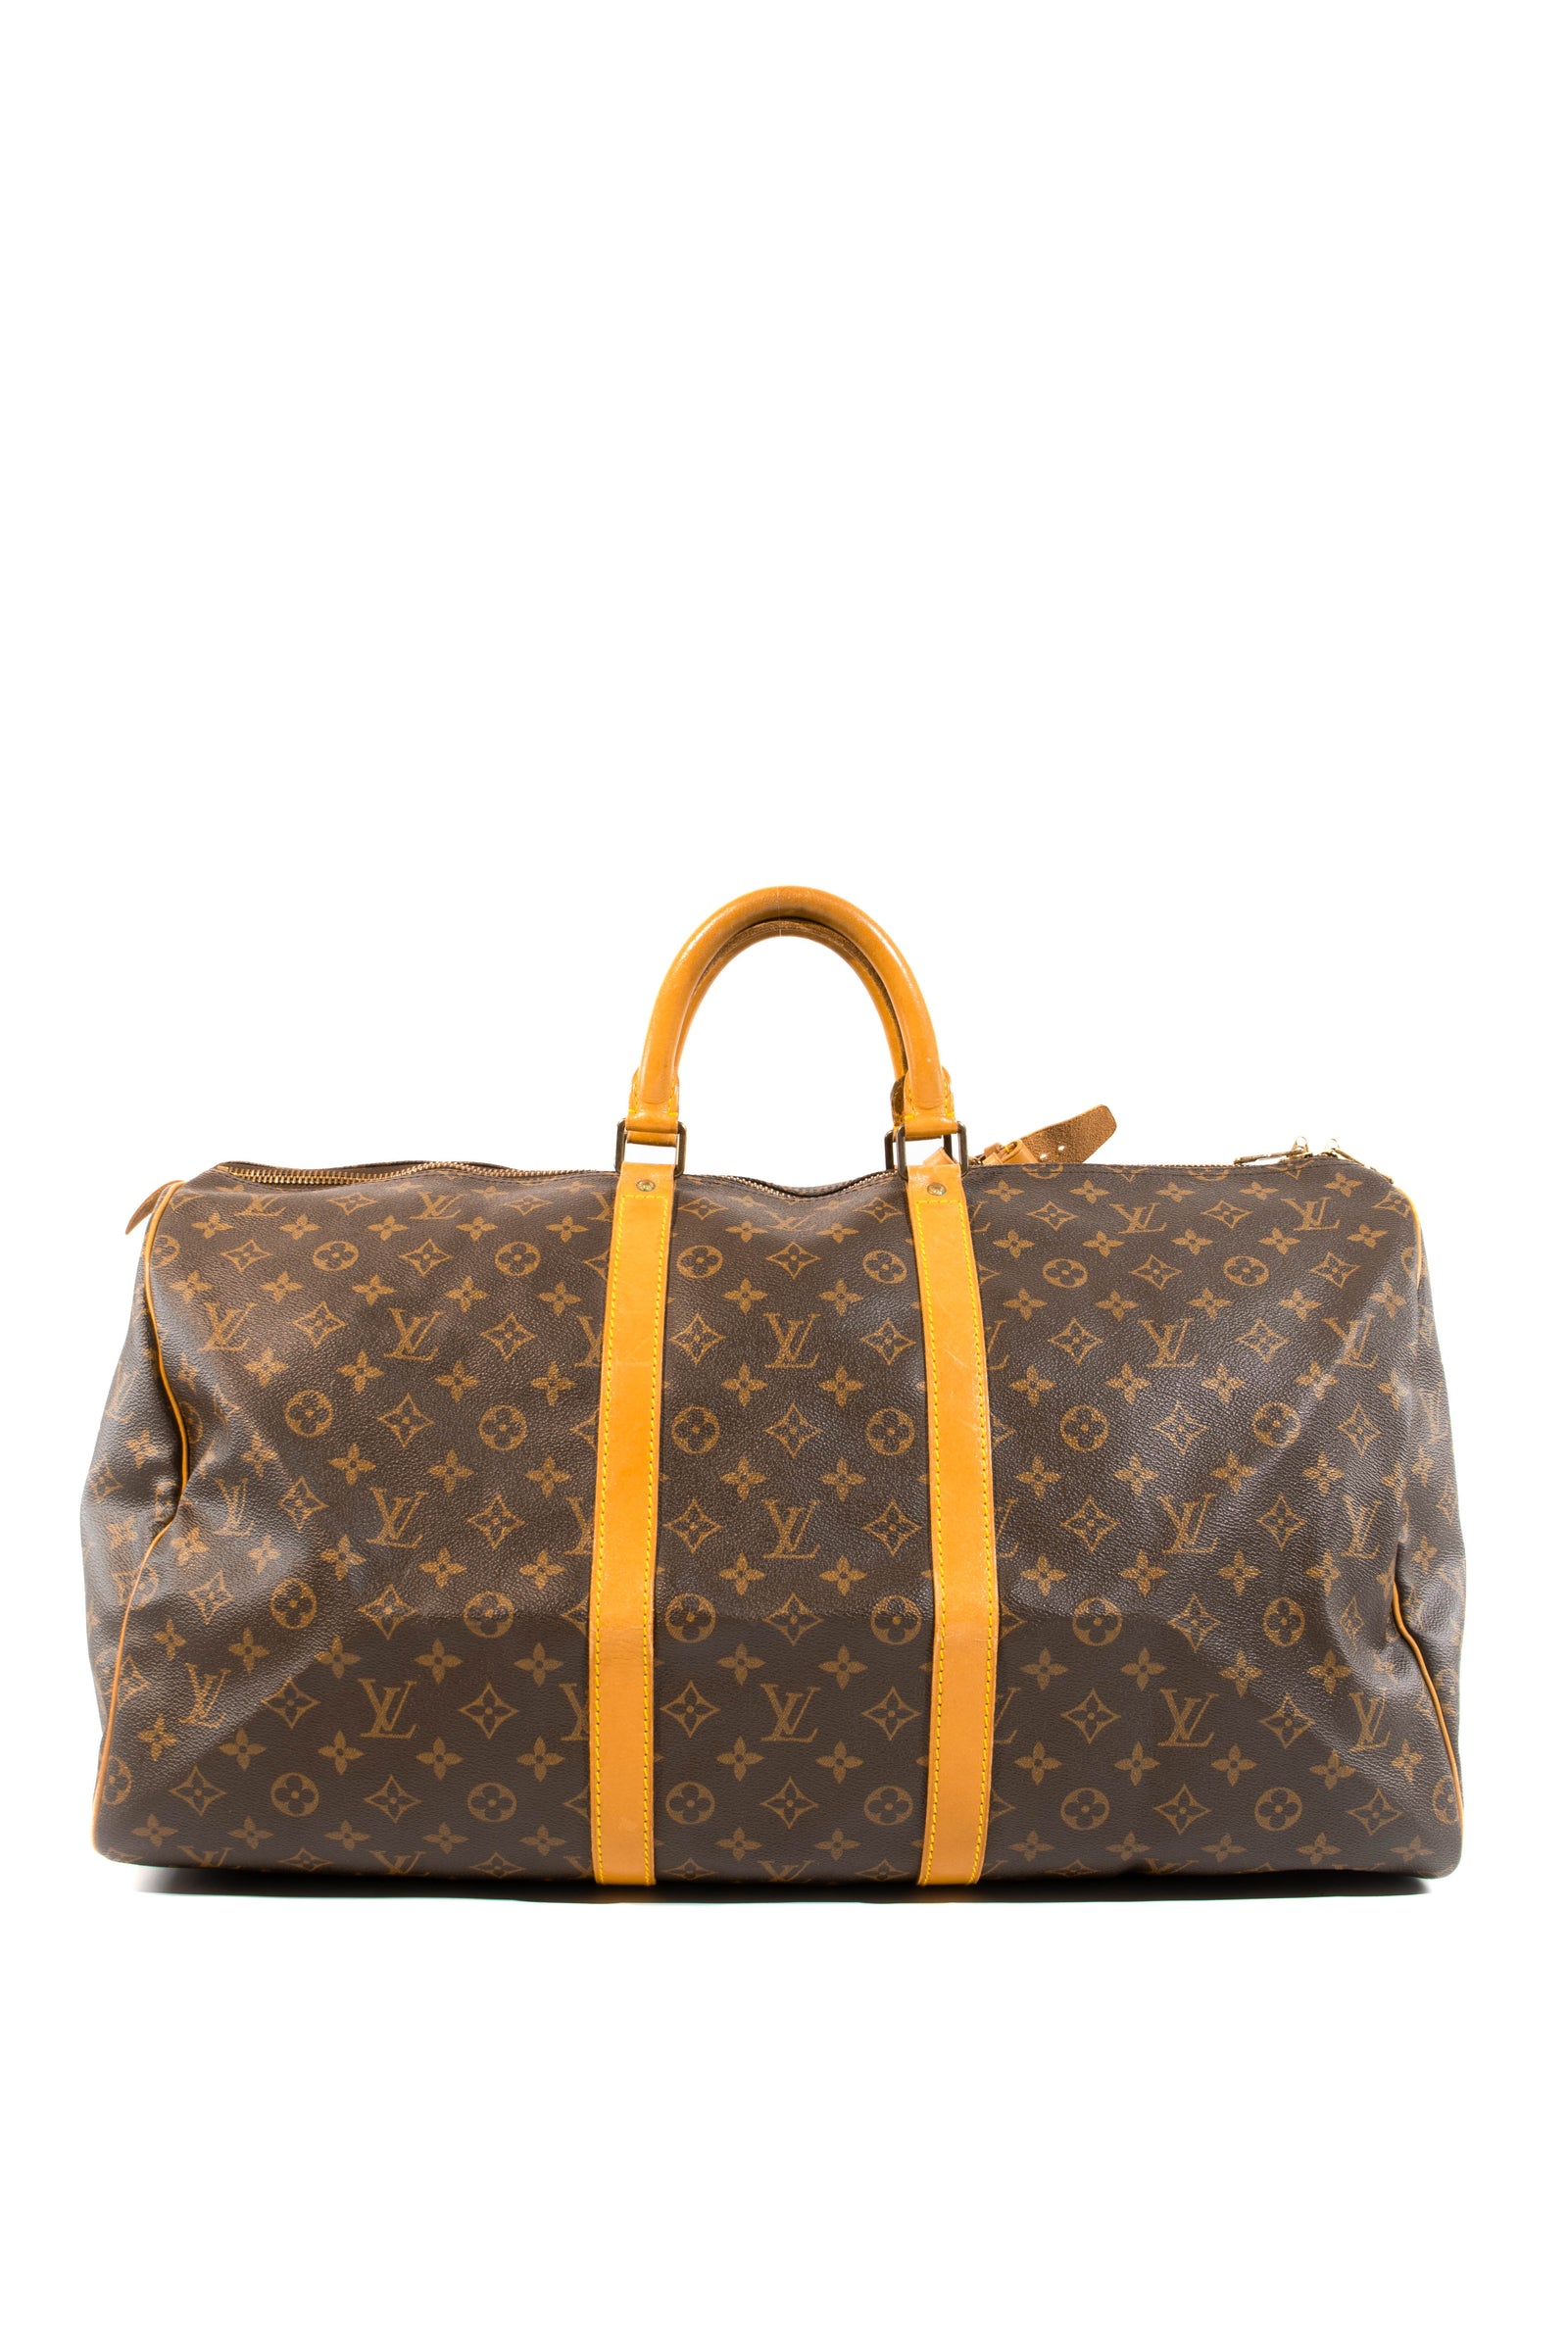 LOUIS VUITTON X SUPREME 100% AUTHENTIC LV KEEPALL 55 BLACK HOLDALL